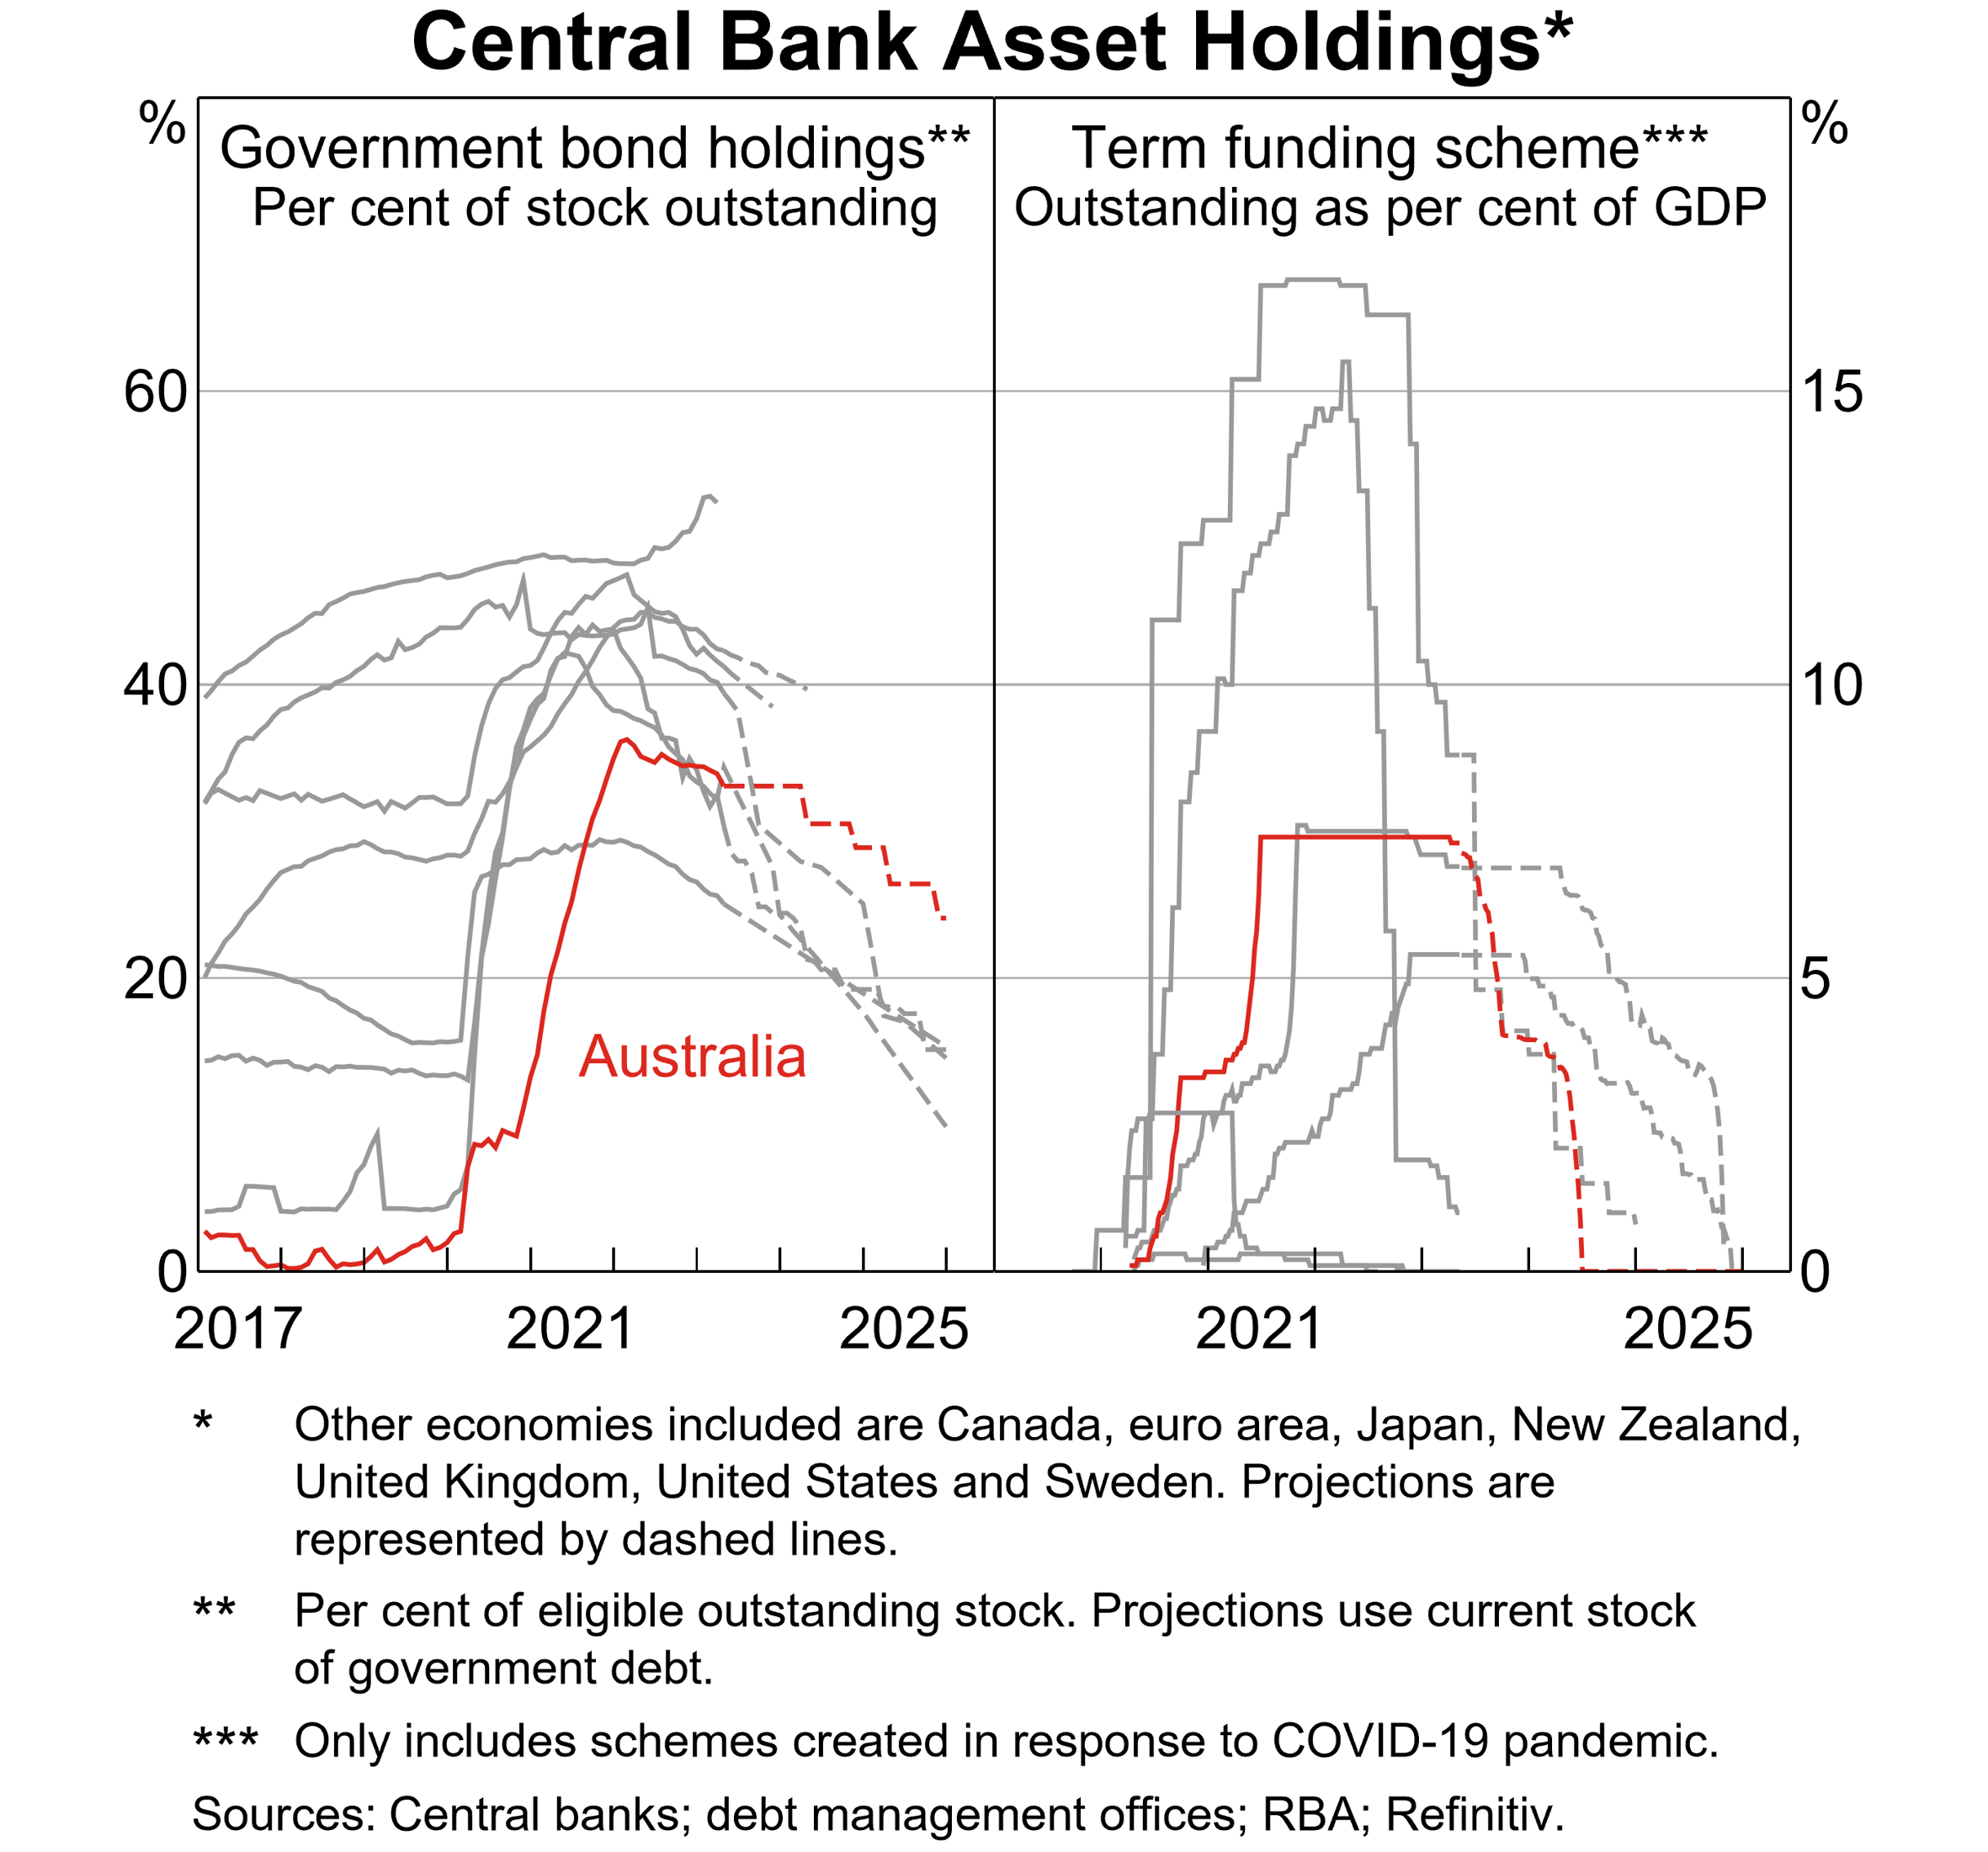 Graph 4: Central Bank Asset Holdings